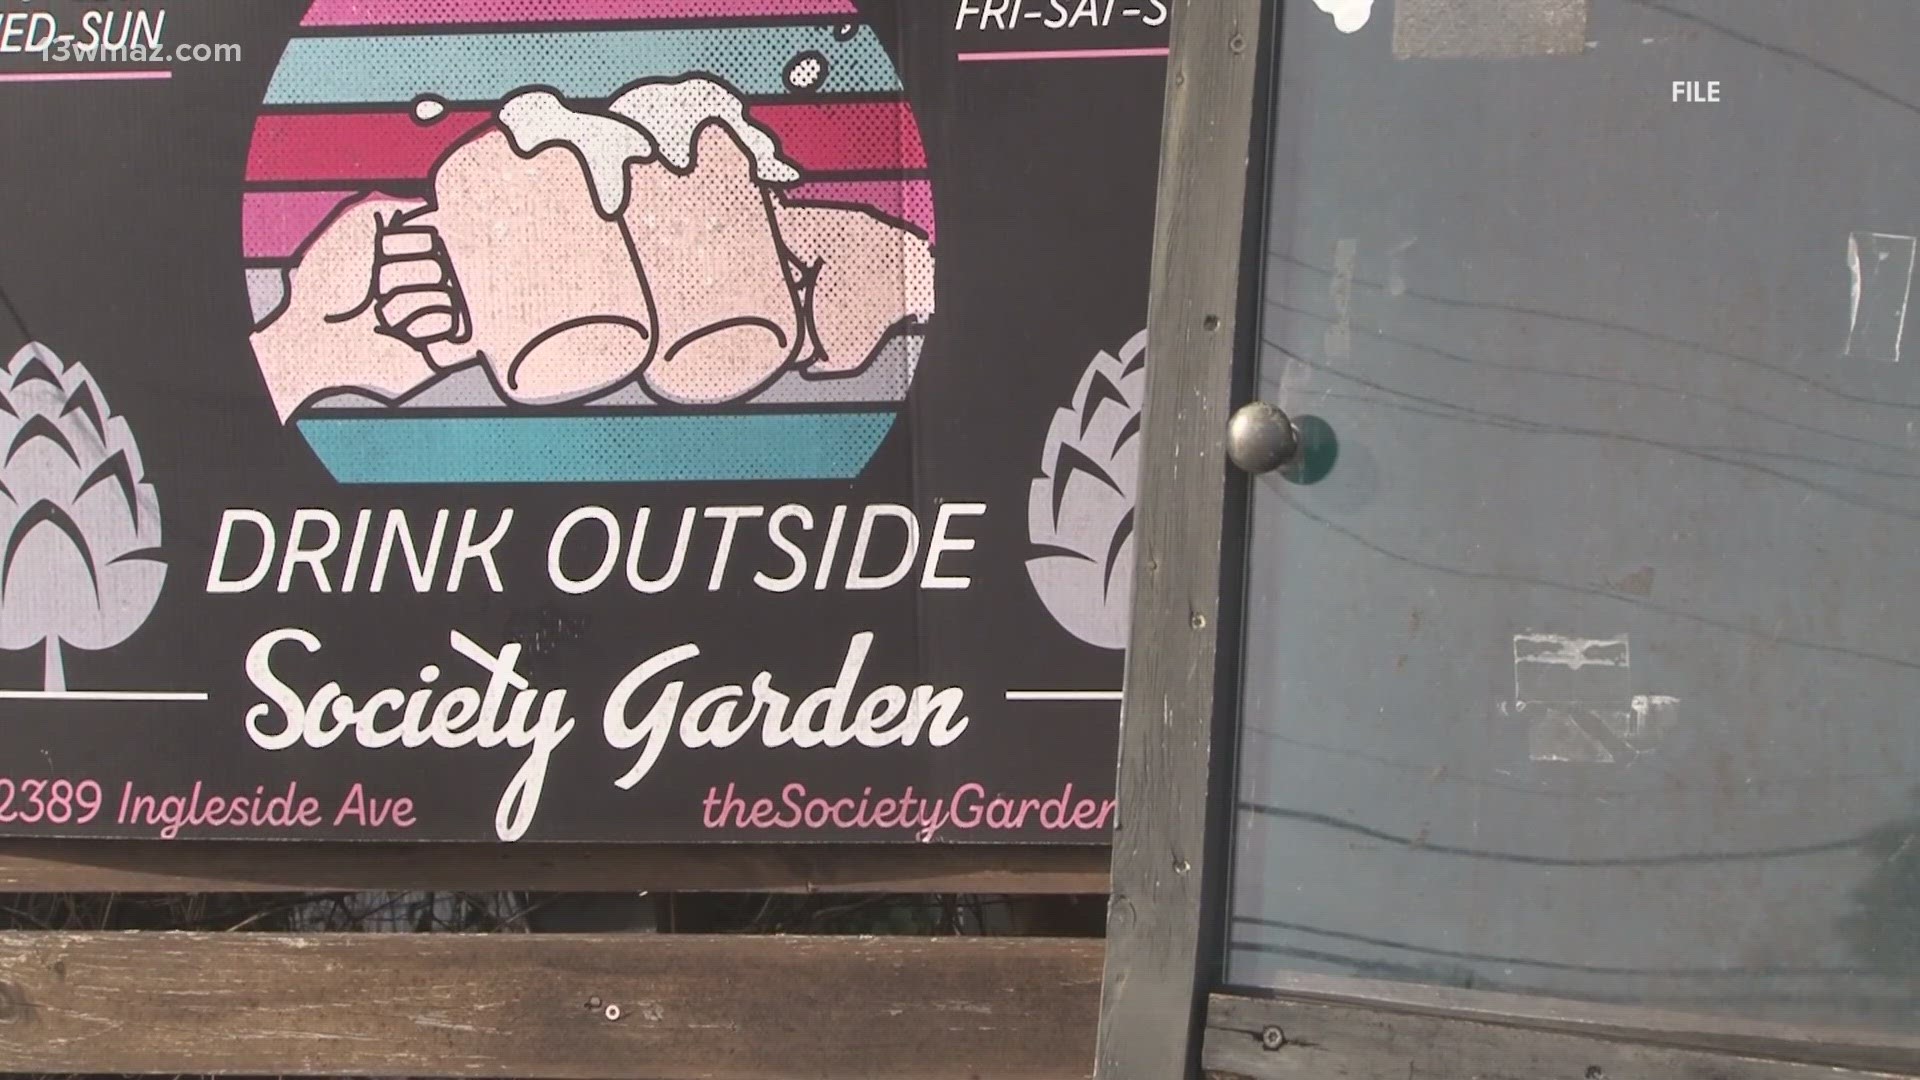 Society Garden has expanded its services without permission from the planning and zoning board. After making recommended changes, the board approved their expansion.